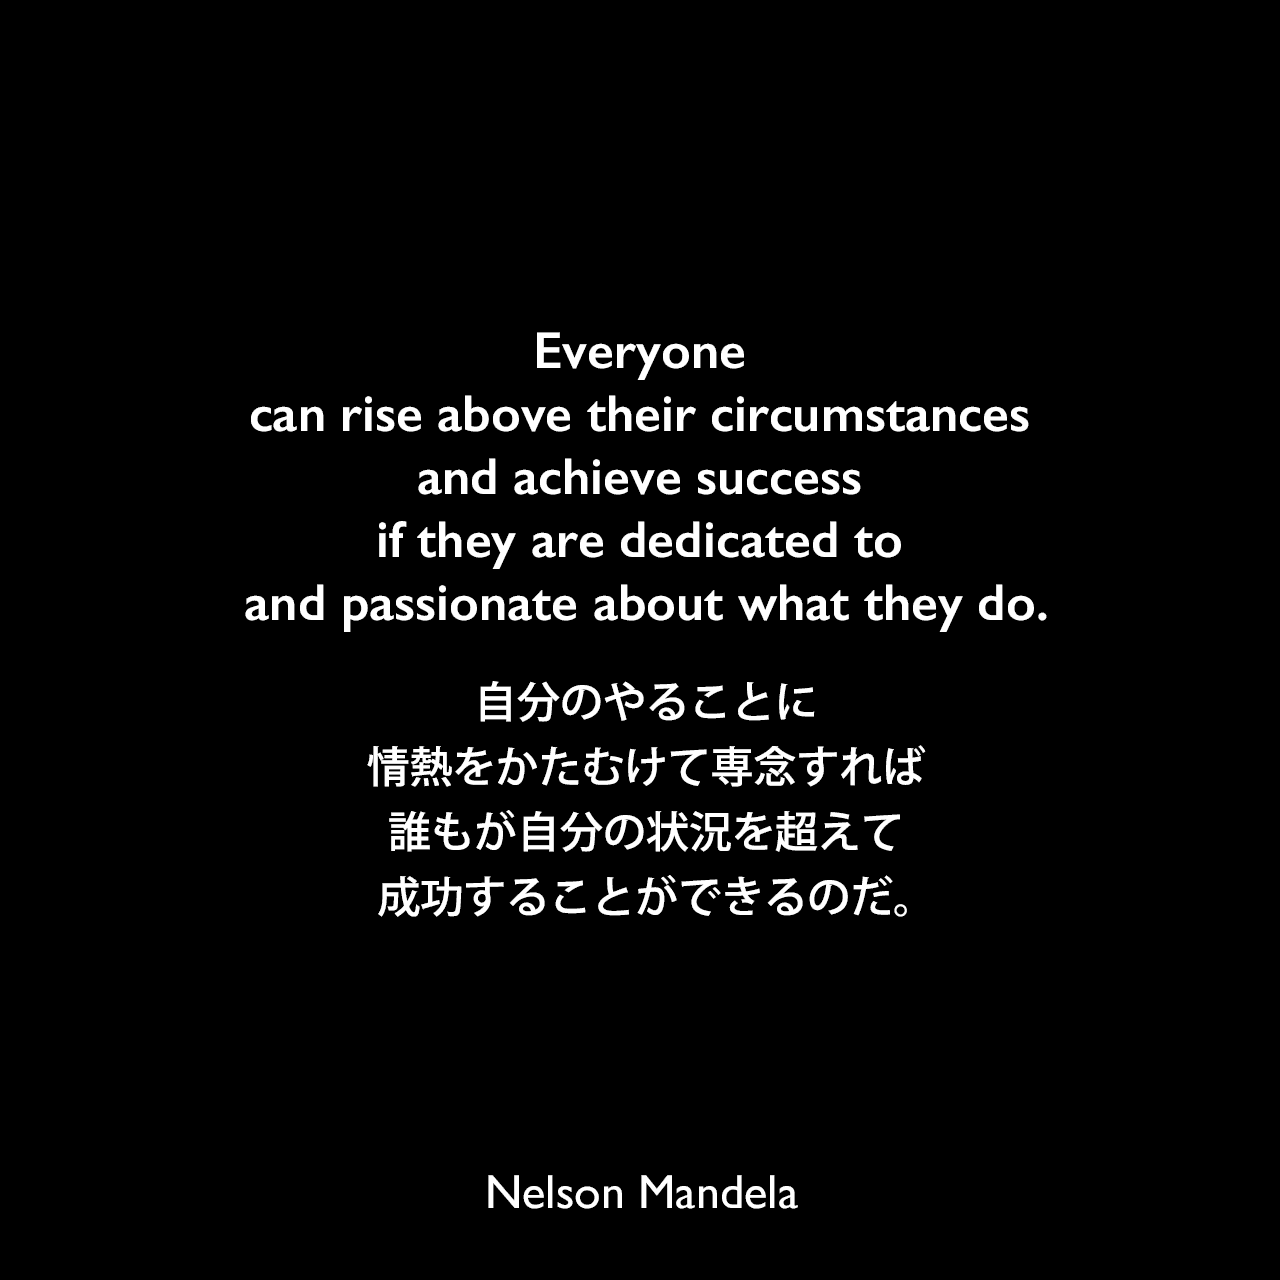 Everyone can rise above their circumstances and achieve success if they are dedicated to and passionate about what they do.自分のやることに情熱をかたむけて専念すれば、誰もが自分の状況を超えて成功することができるのだ。- マッカヤ・ニーニへ宛てた手紙よりNelson Mandela